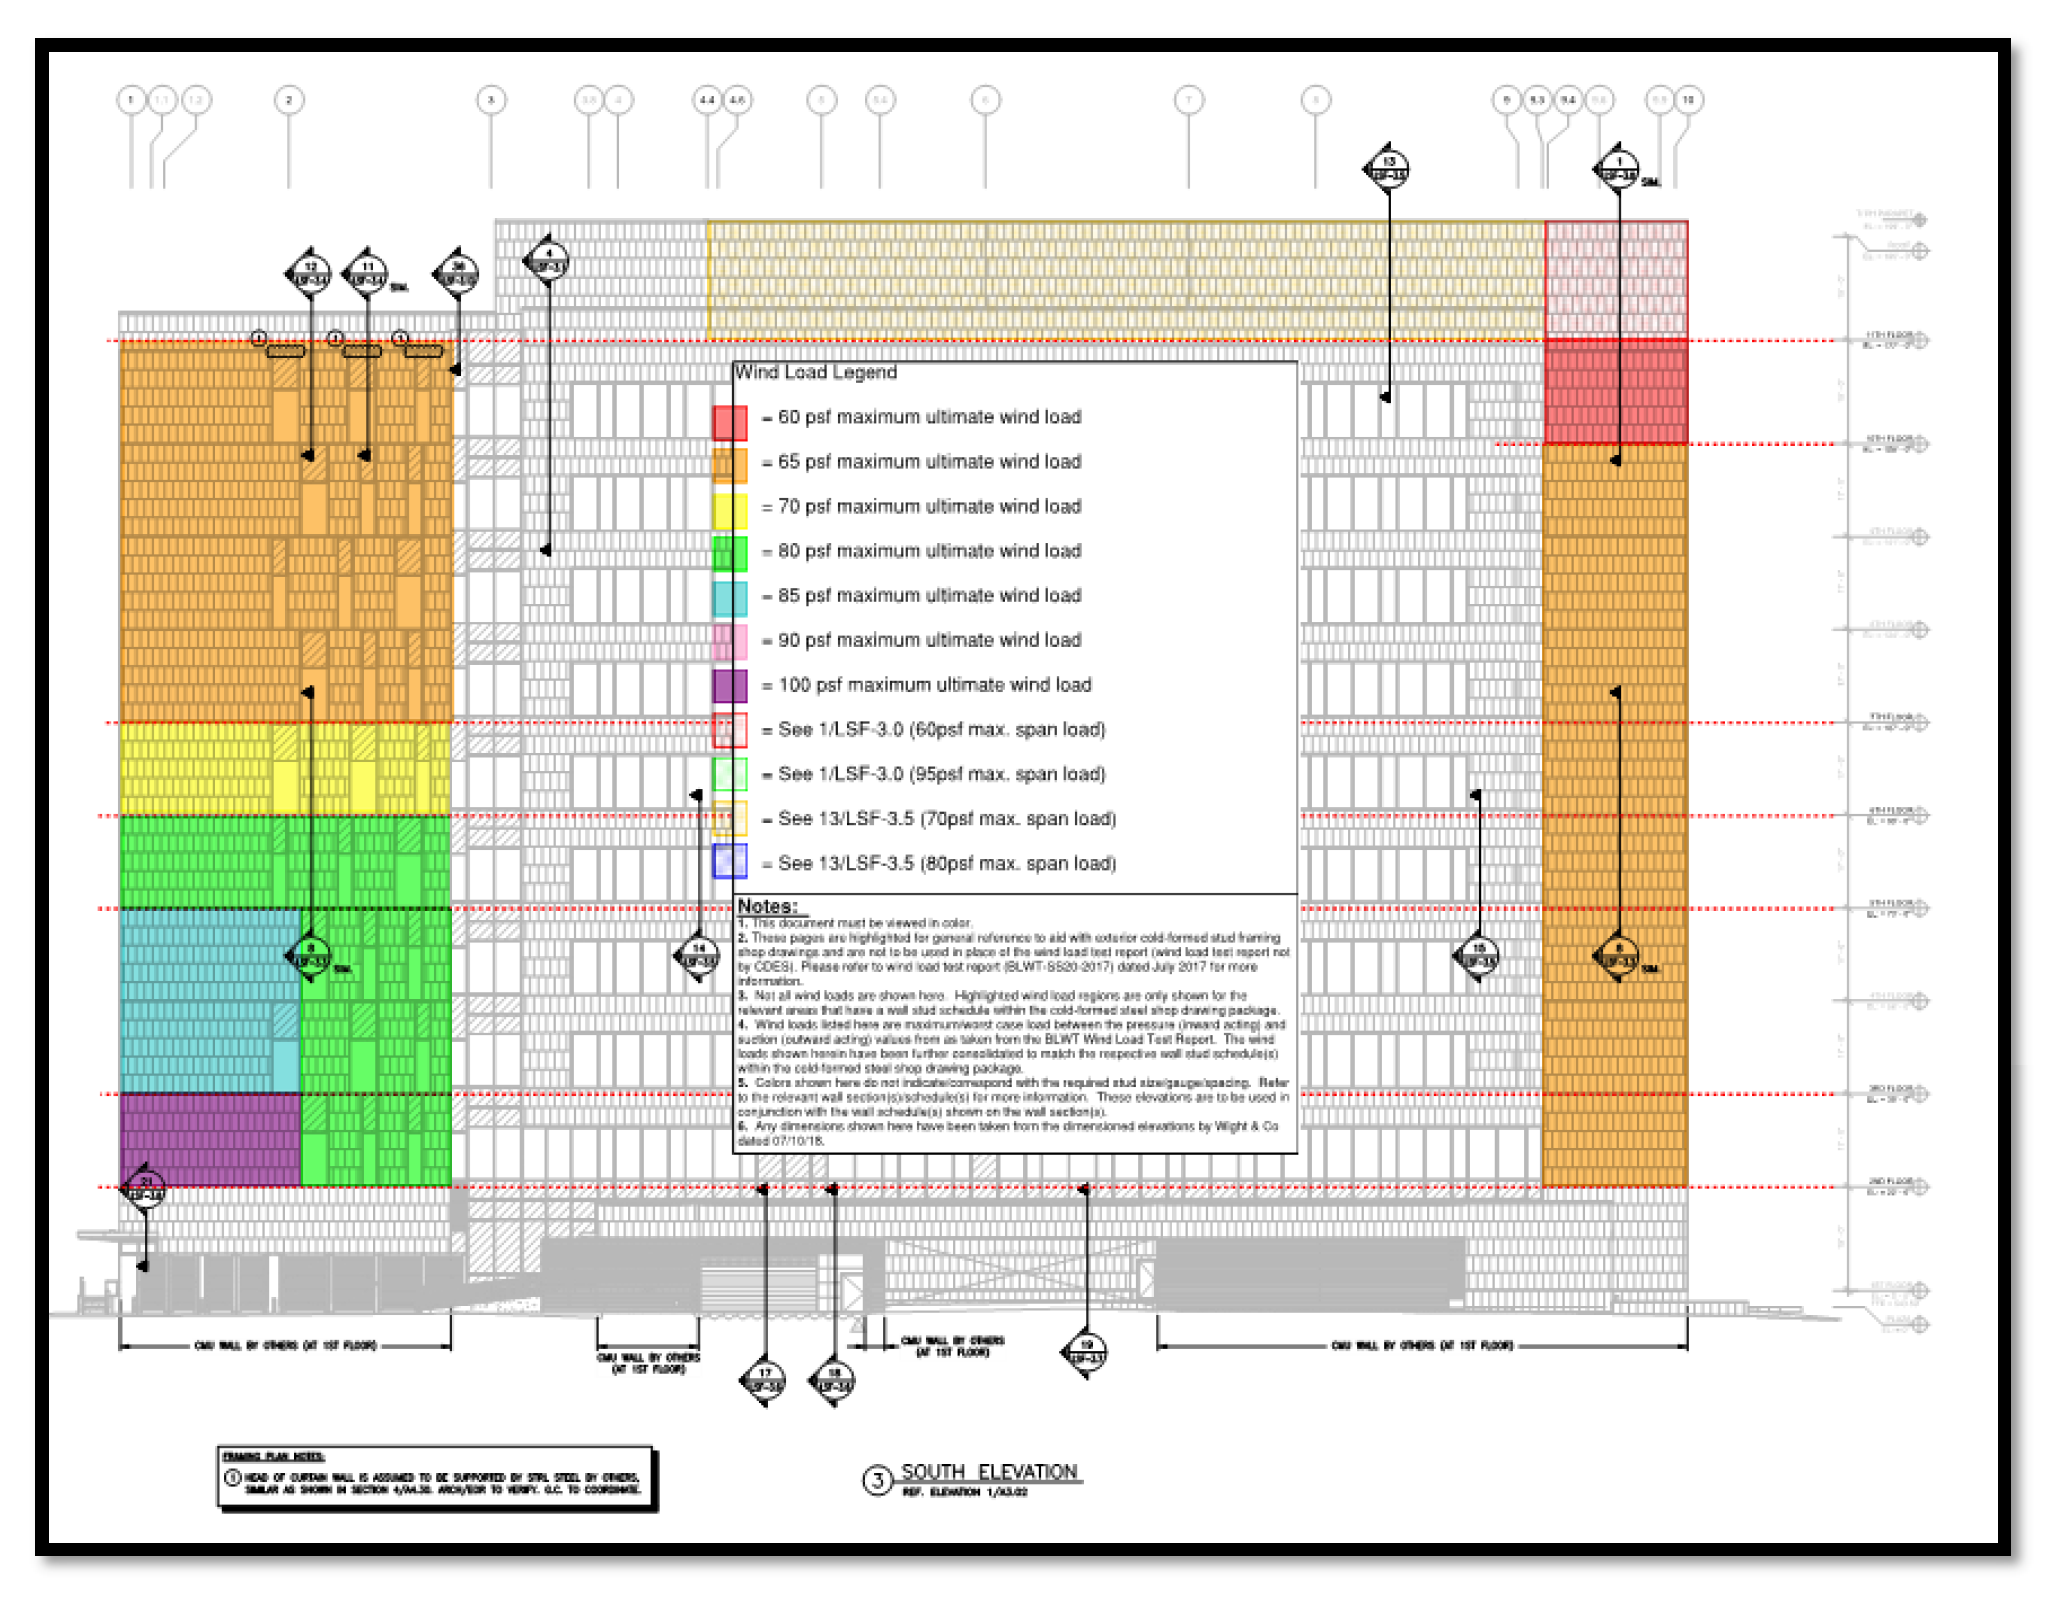 View from the color-coded reference page of CDES’s shop drawings for coordination with wind
tunnel test report.